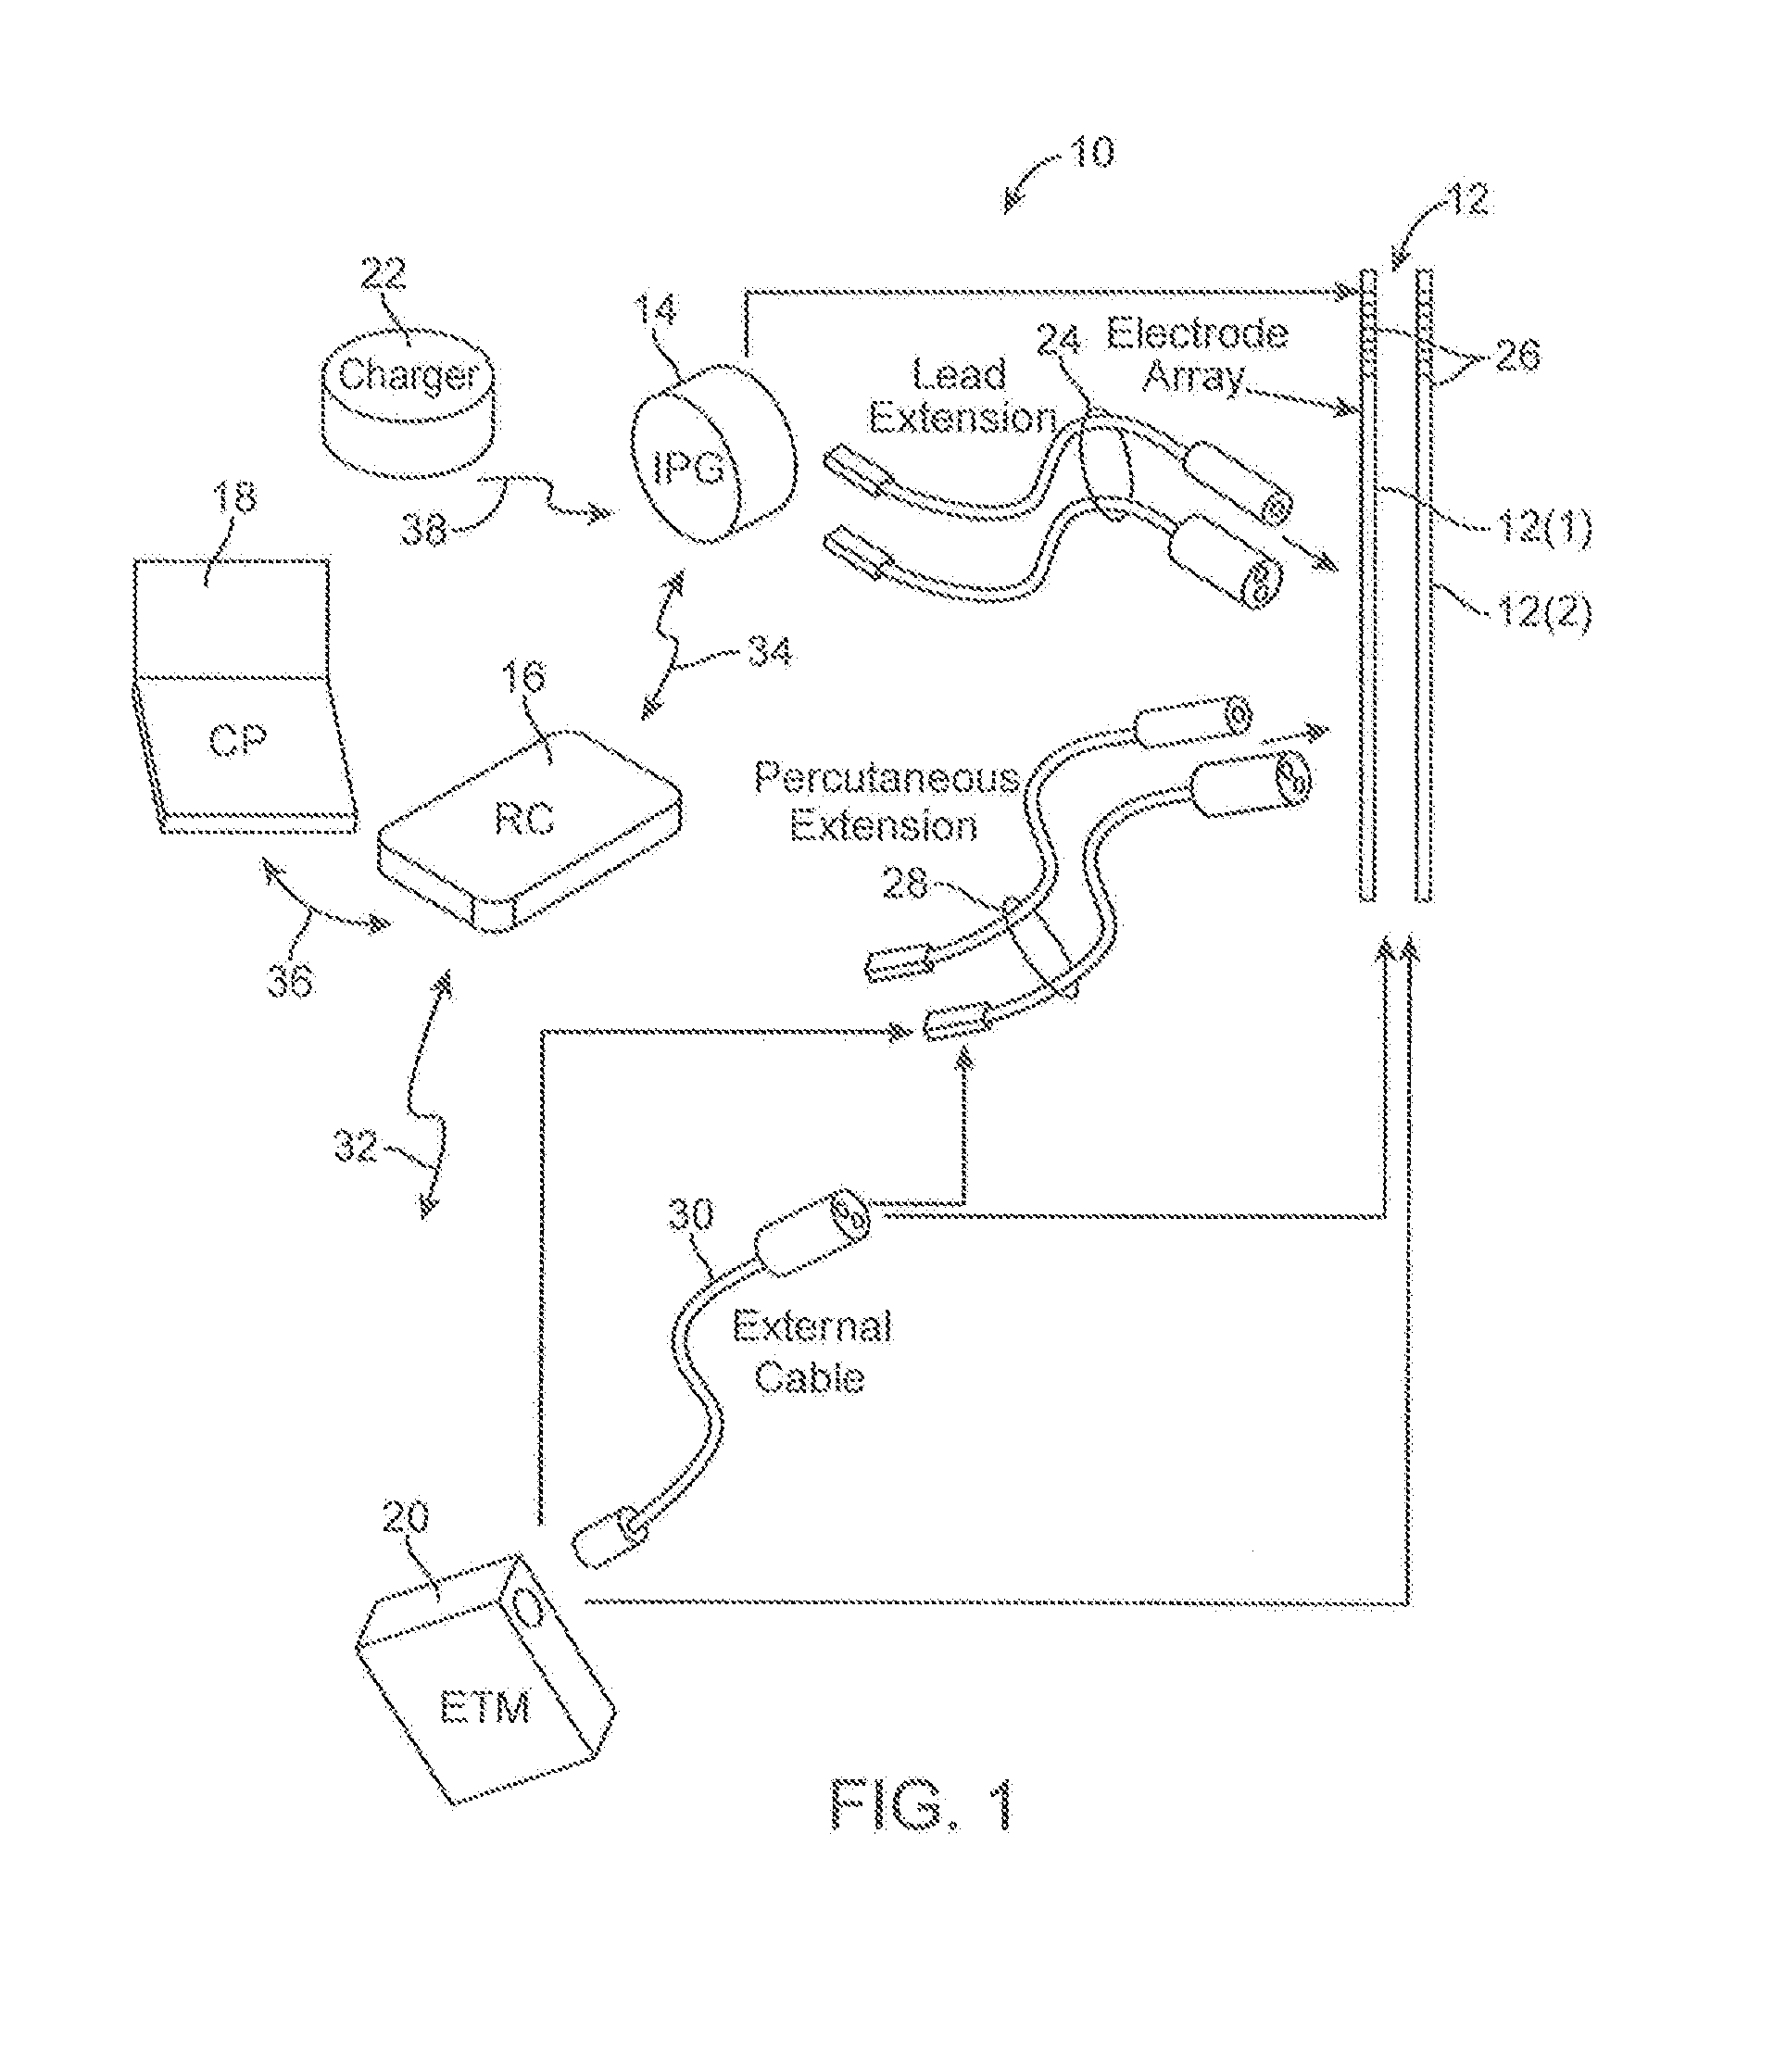 Electrode selection for sub-threshold modulation therapy